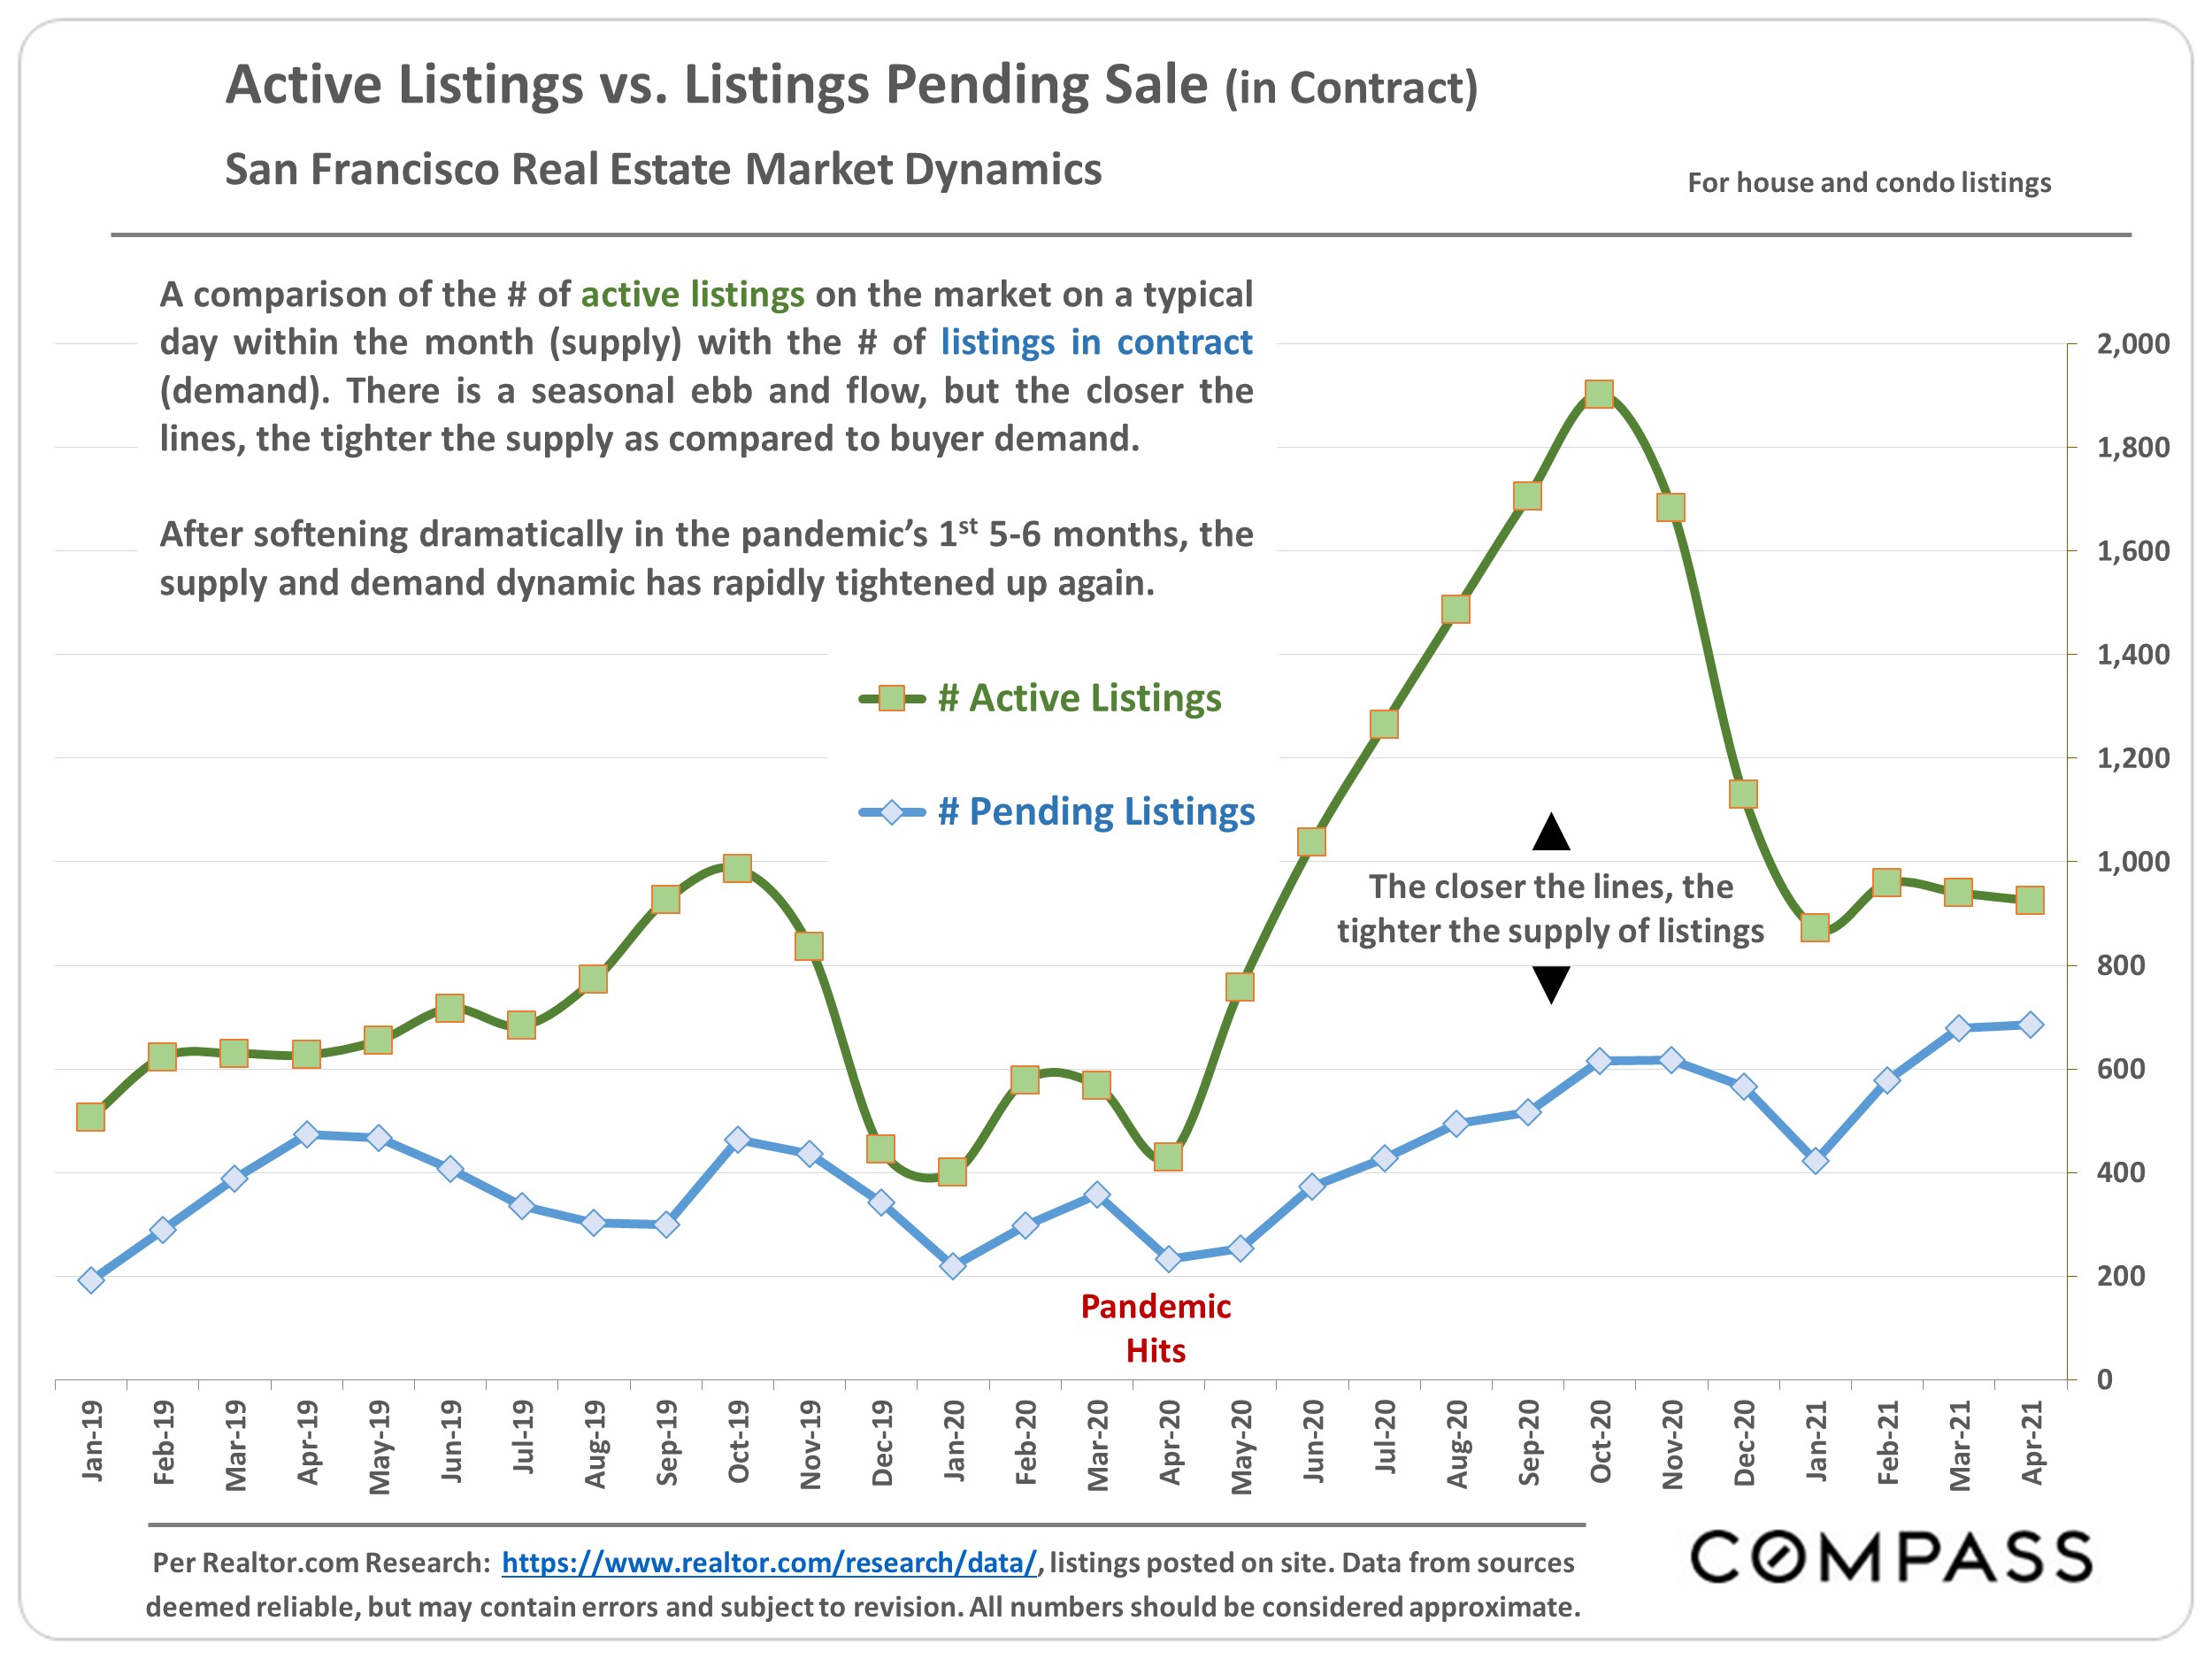 Chart showing the Active Listings vs Listings Pending Sale (in Contract), San Francisco Real Estate market Dynamics